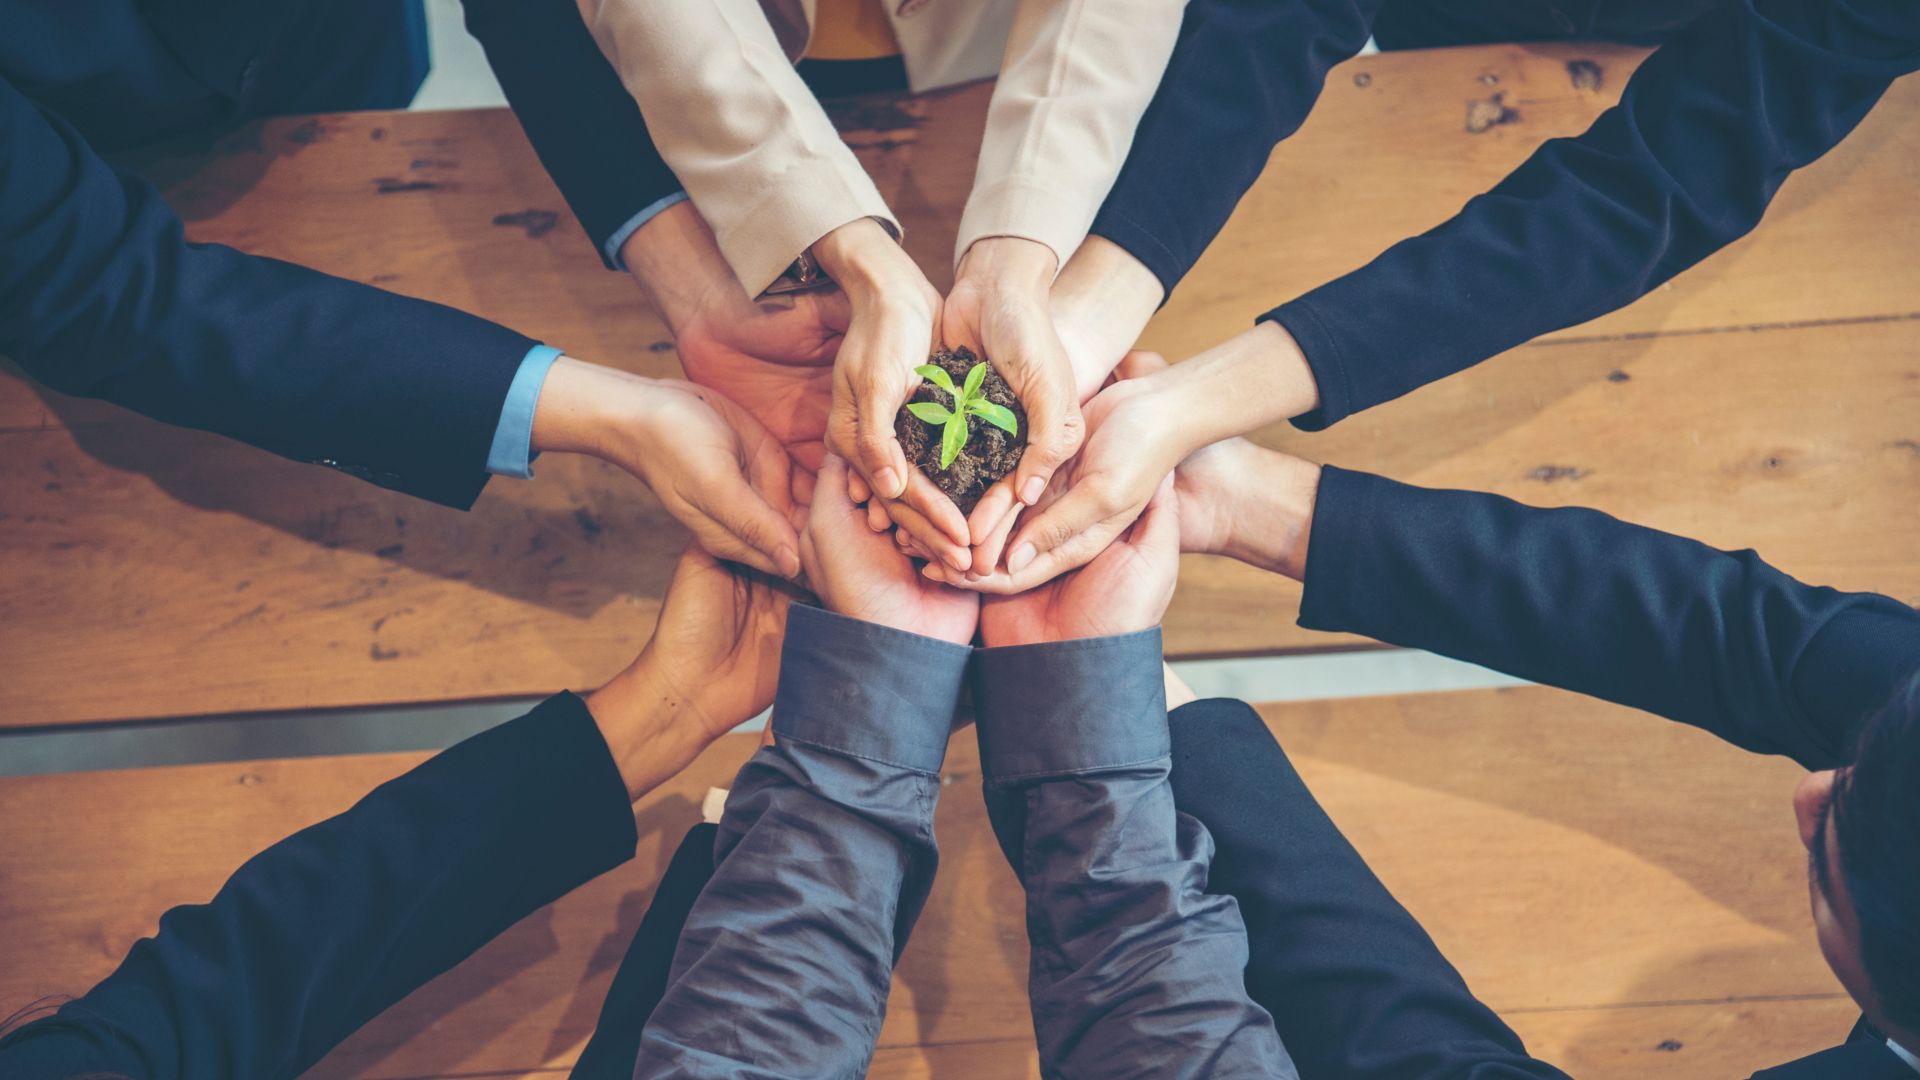 Green business eco company partners holding plant together trust mission team with green hands stacked. Ecology collaboration development ecosystem organization in greenery company partnership concept